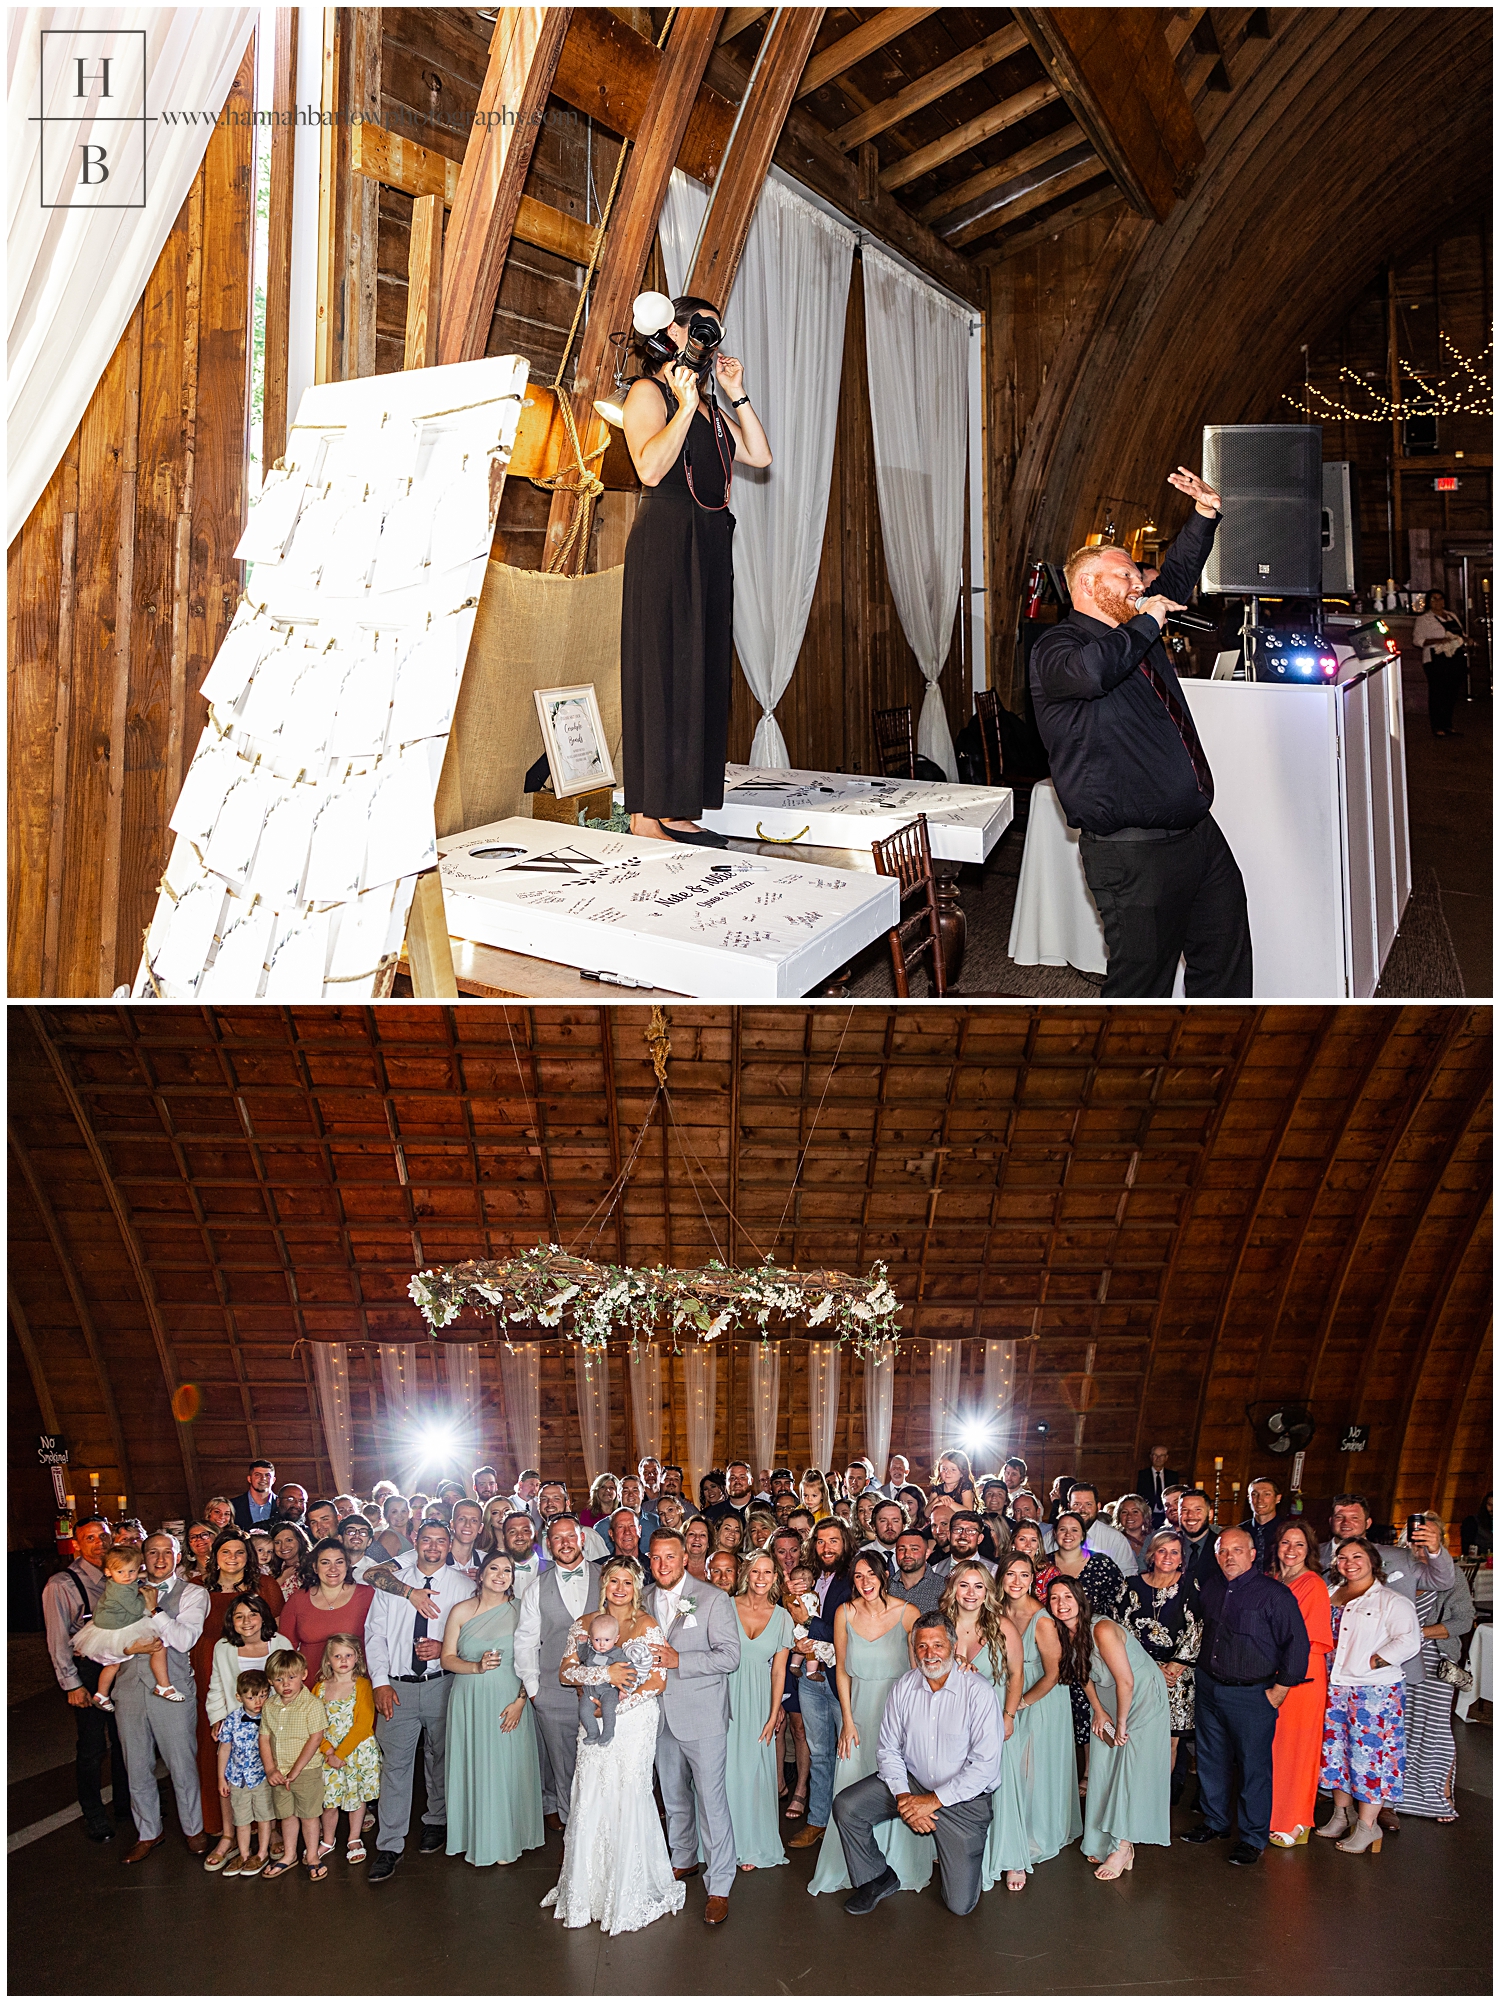 Wedding photographer stands on table to take large group shot